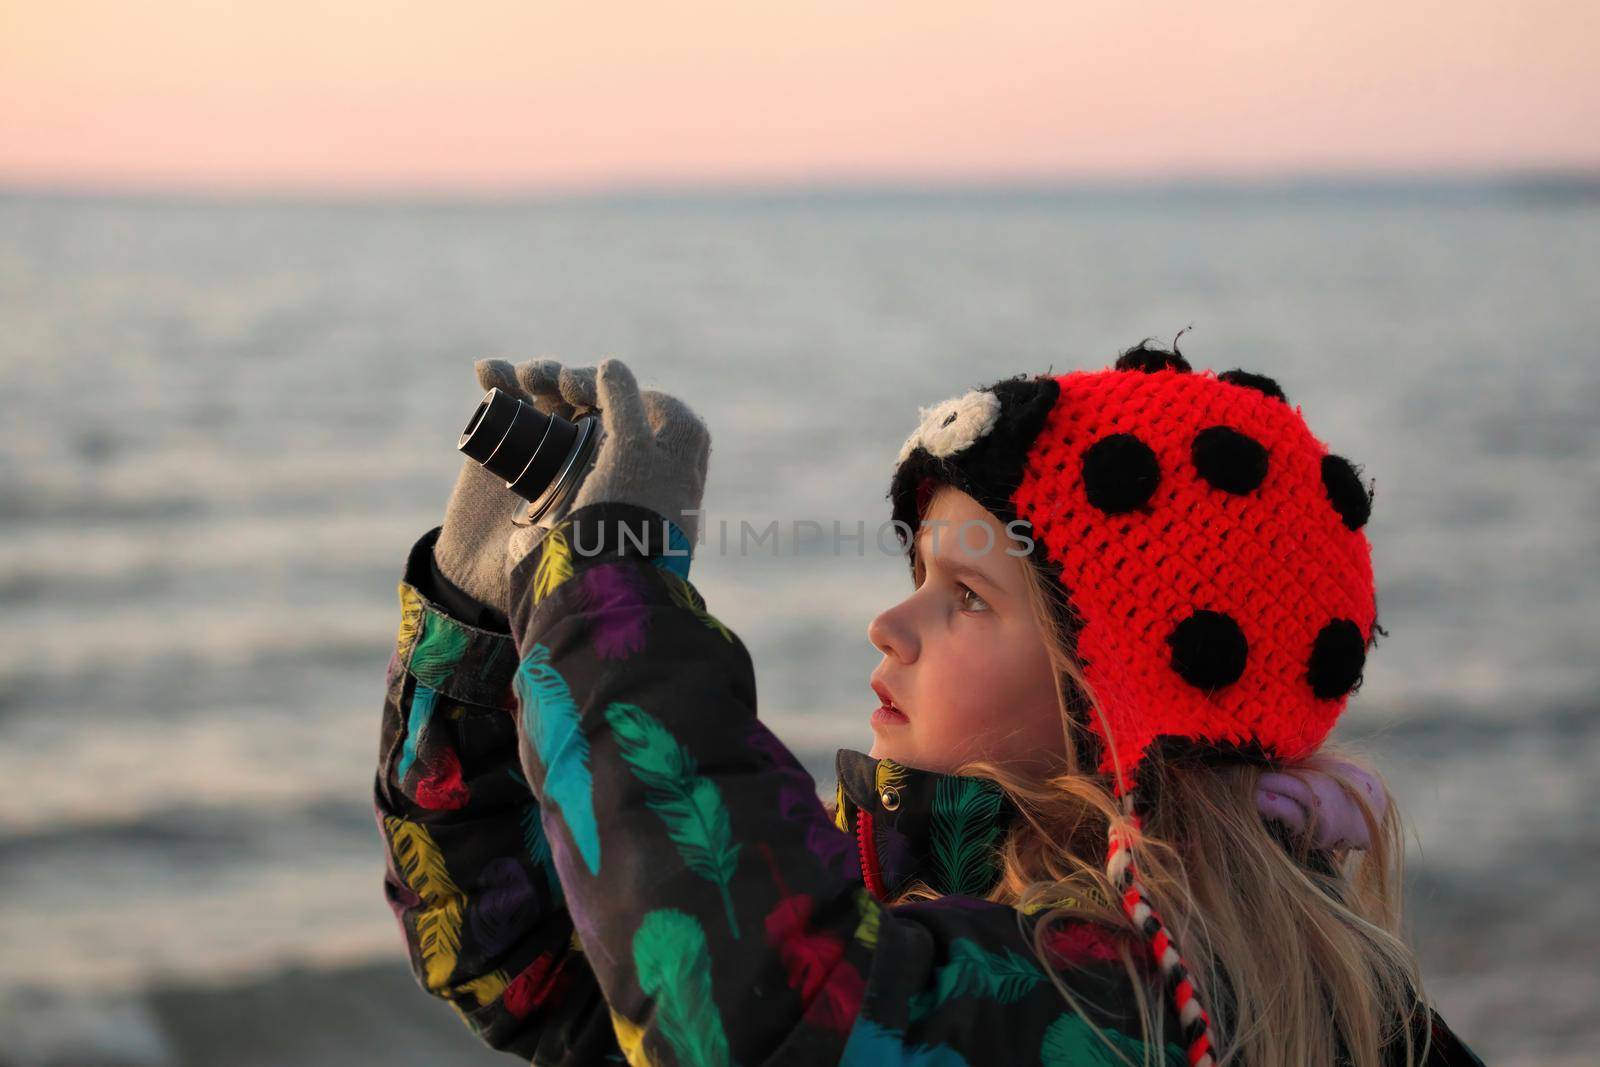 A 9 year old girls takes pictures with a camera at the beach at sunset. by markvandam